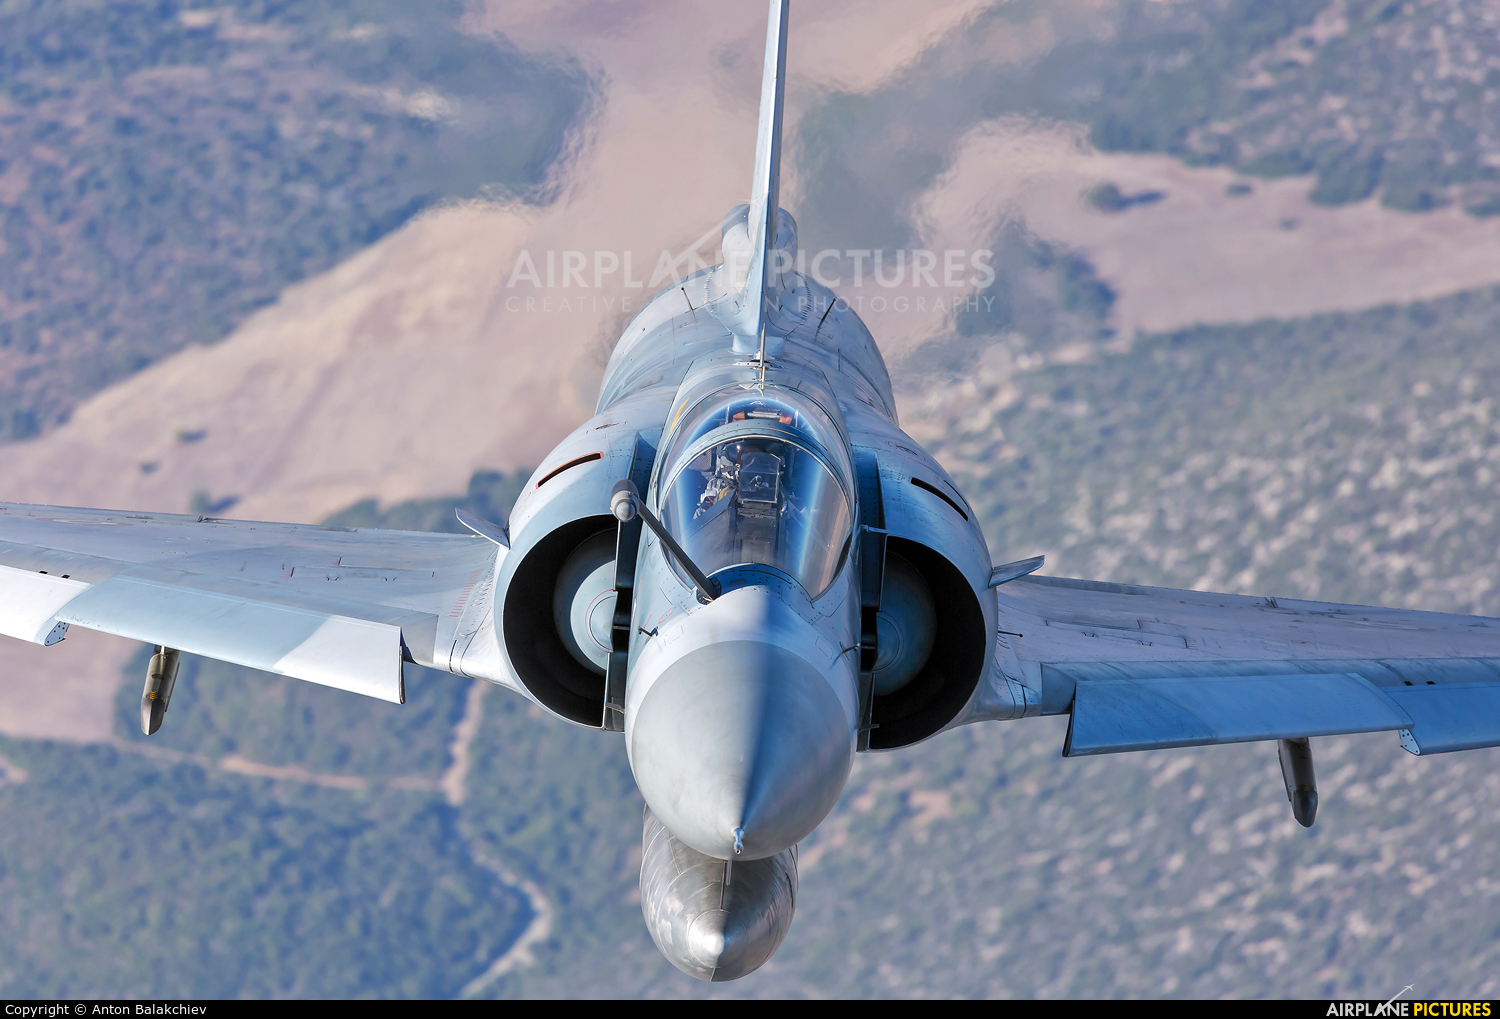 Greece - Hellenic Air Force 242 aircraft at In Flight - Greece